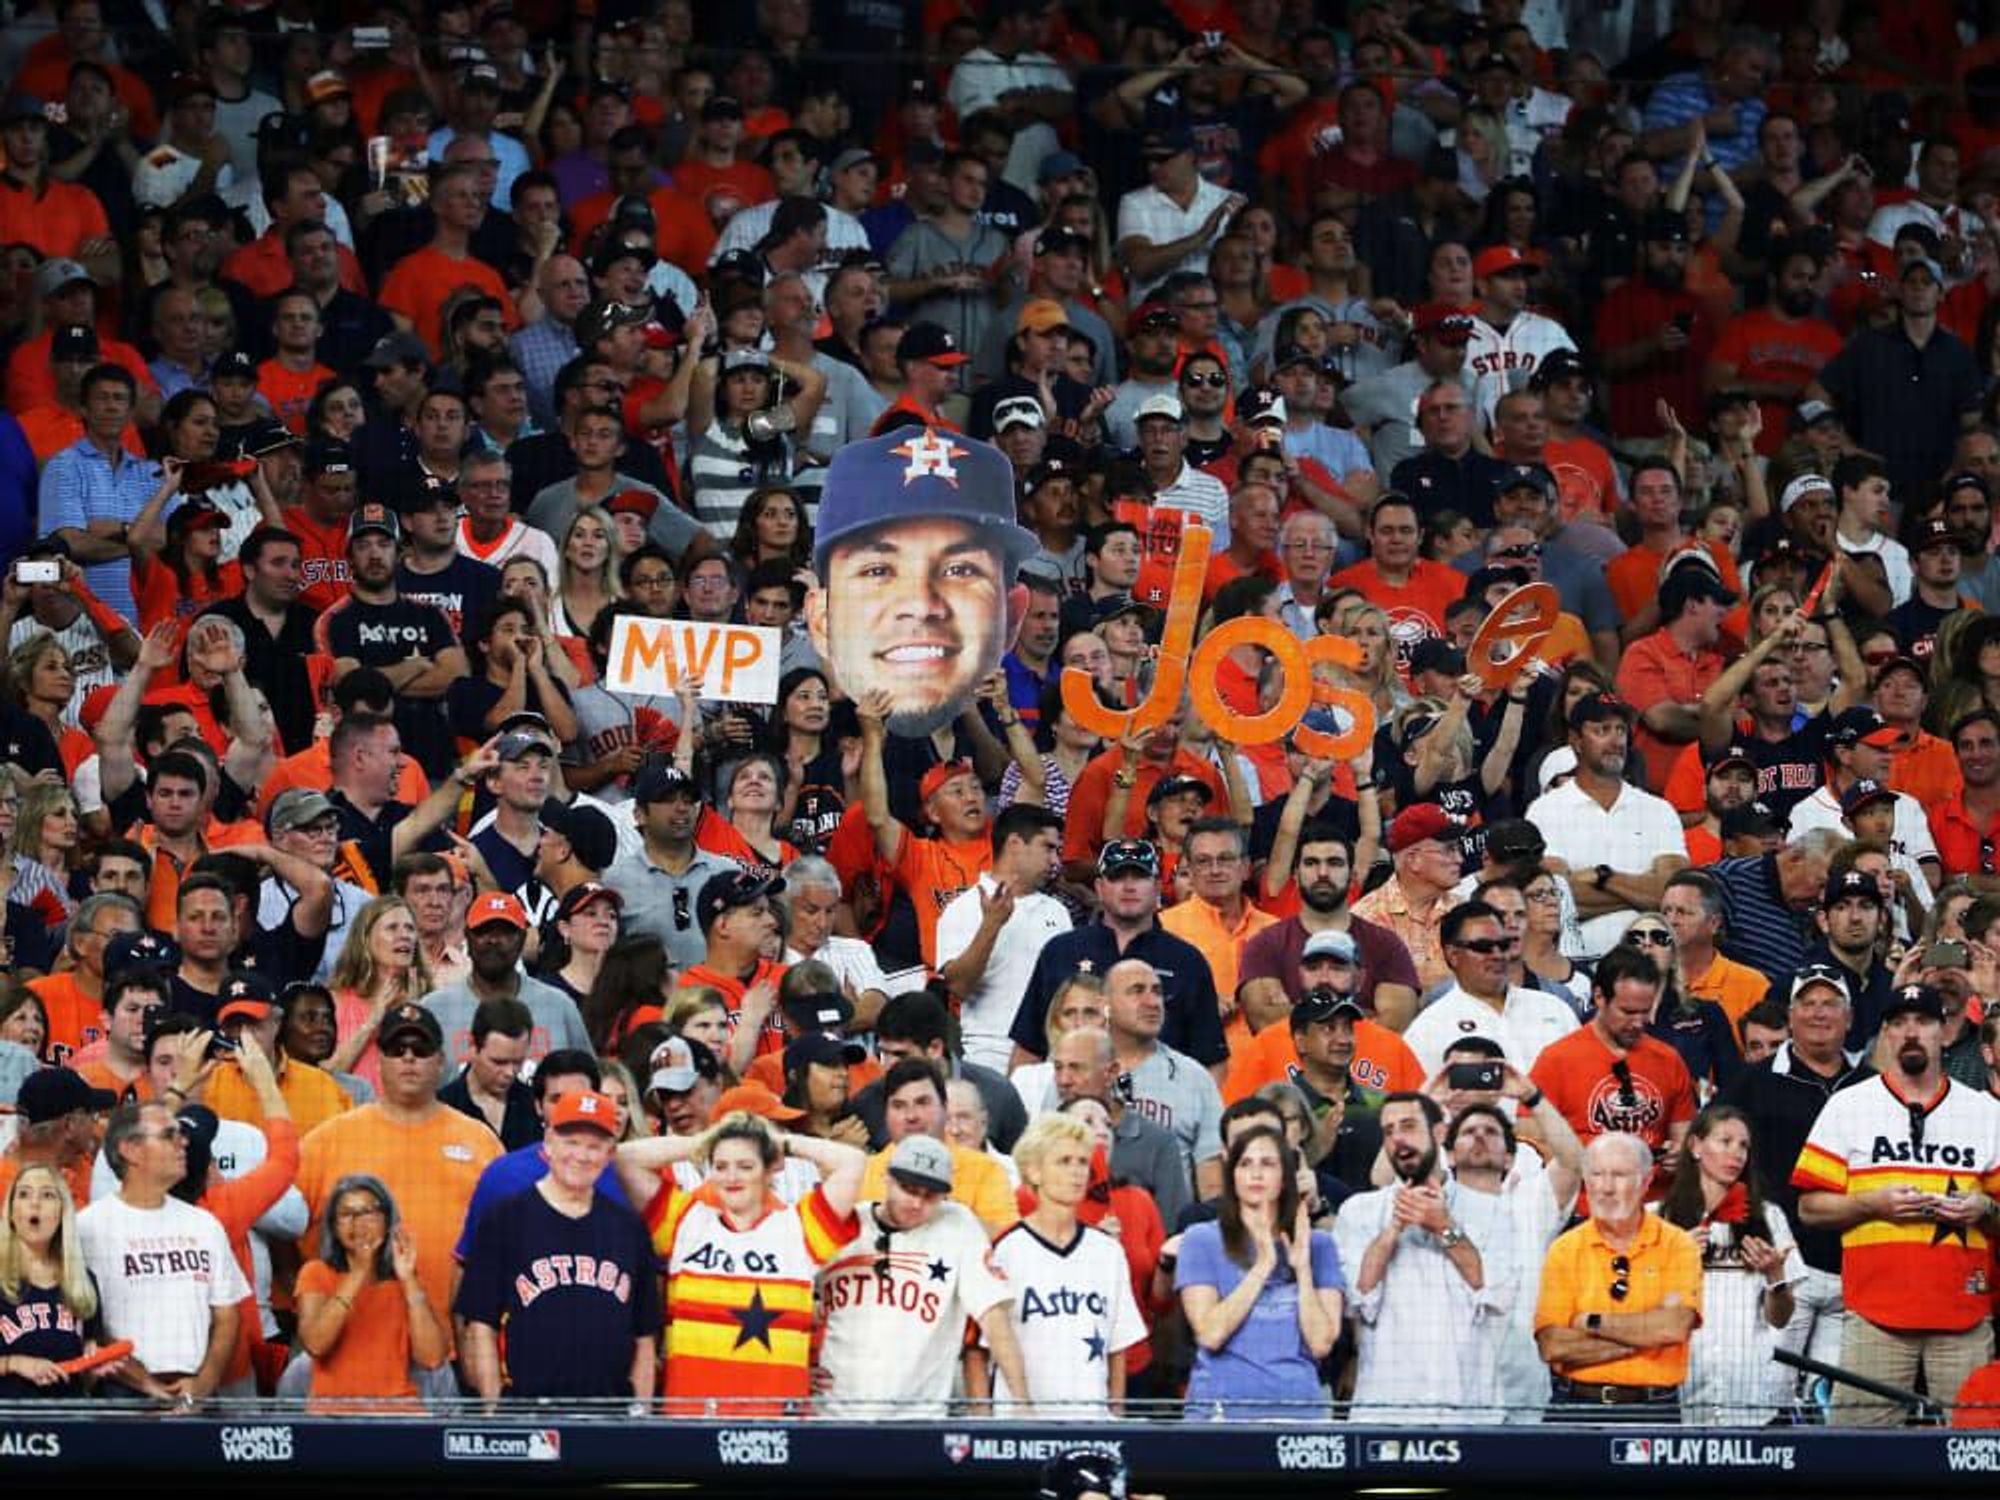 Astros Team Store open 24 hours for fans to grab swag